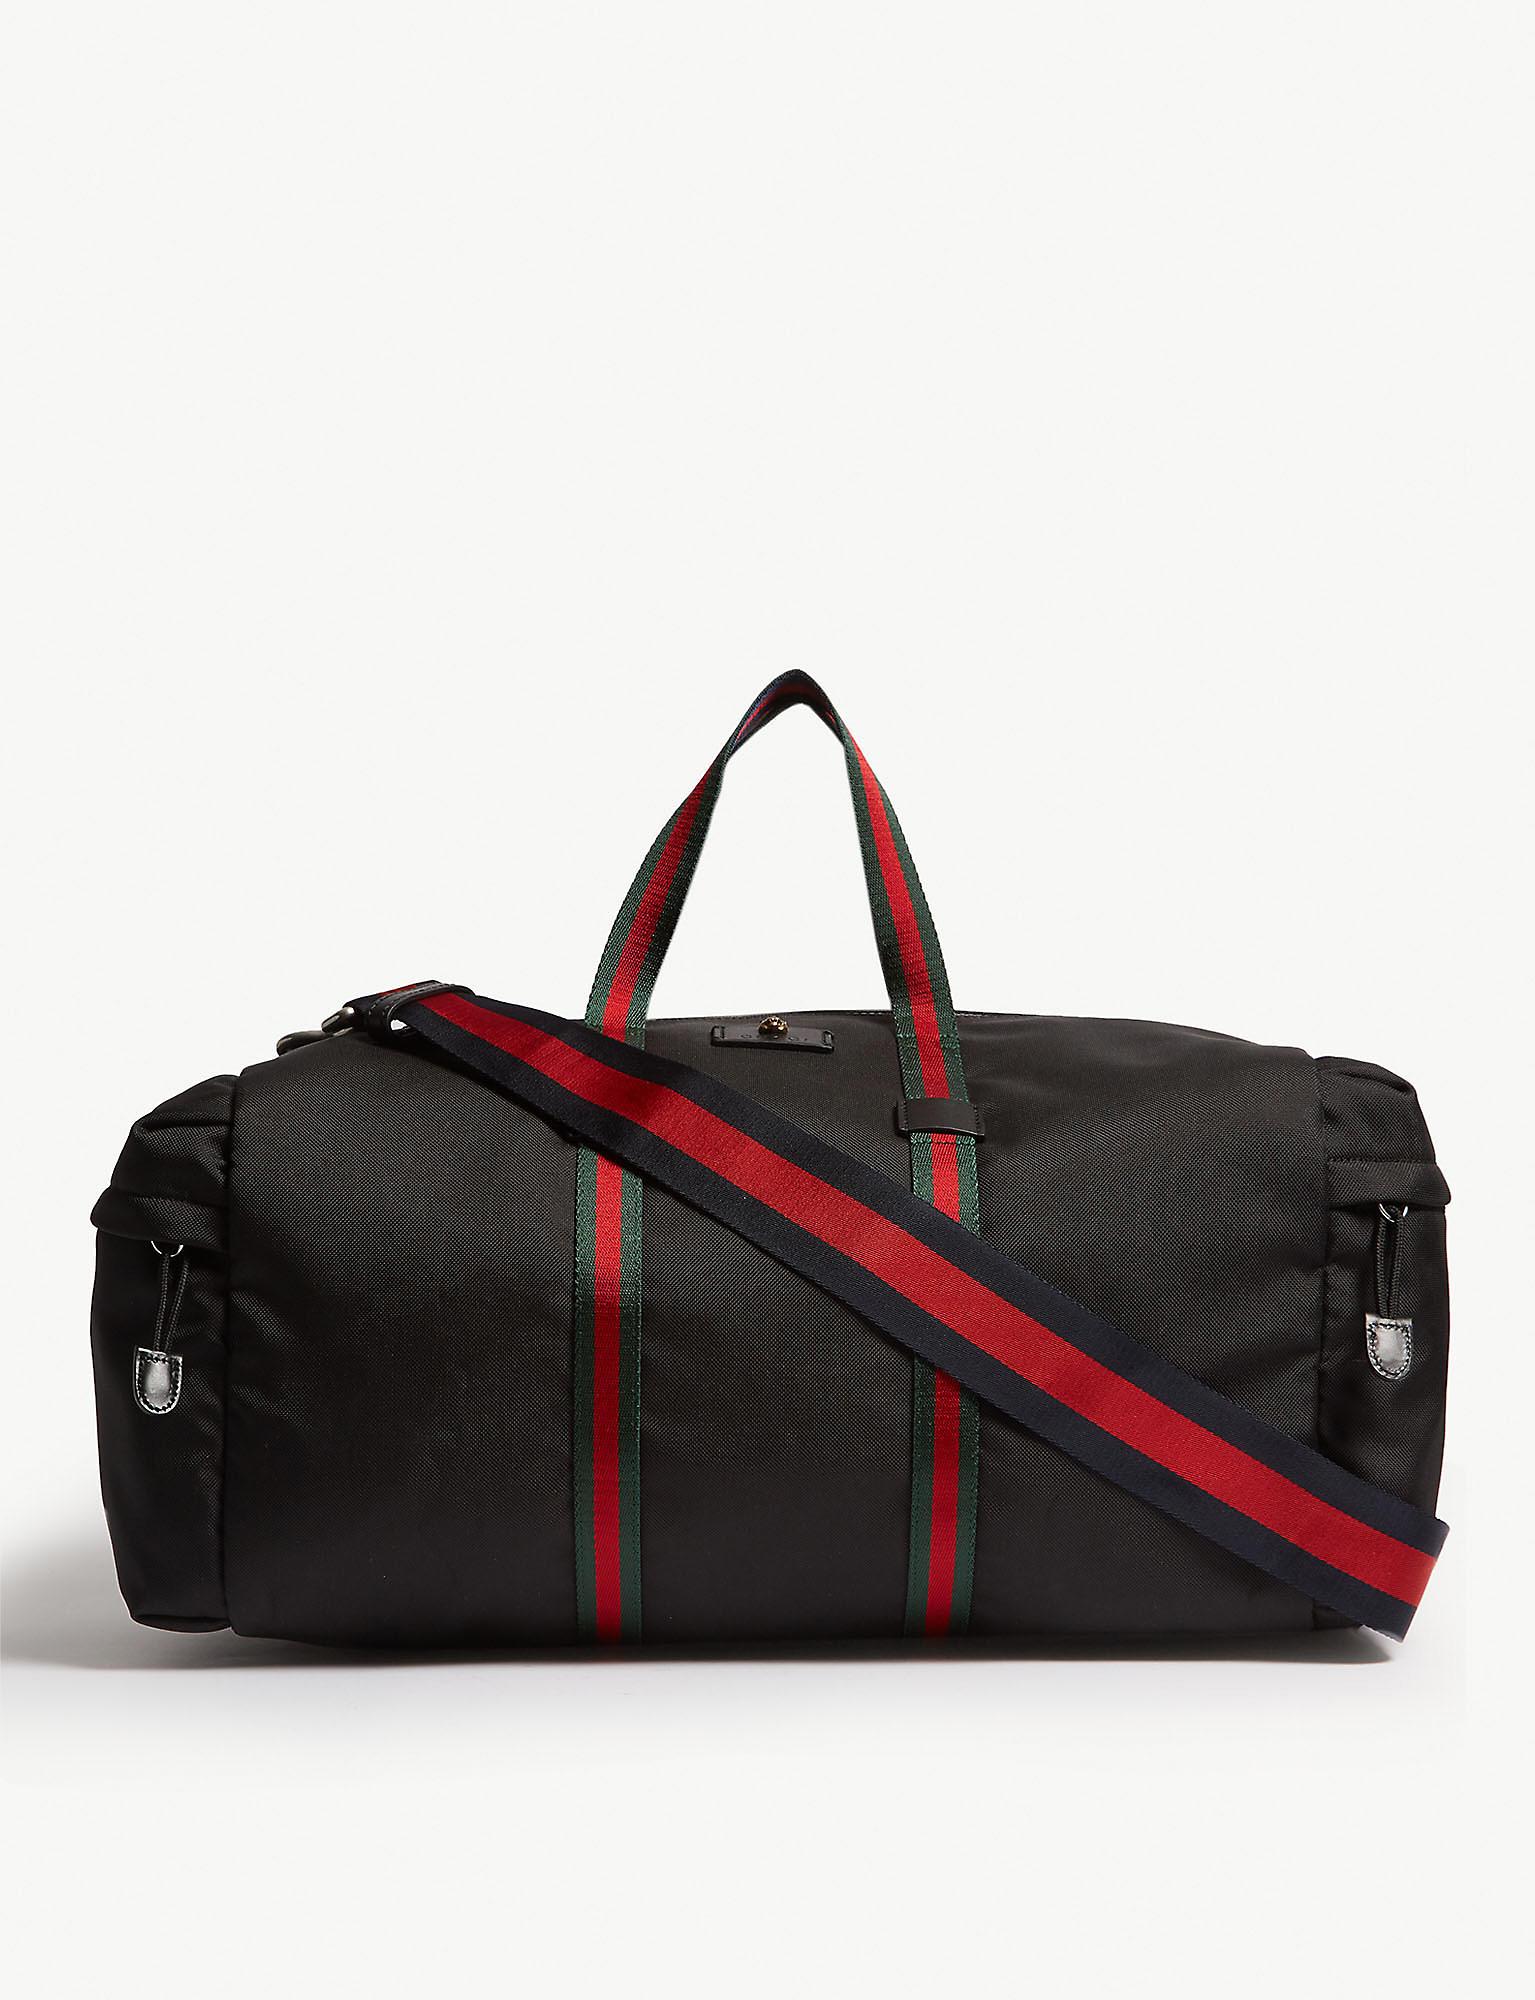 Gucci Technical Canvas Duffle Bag in 